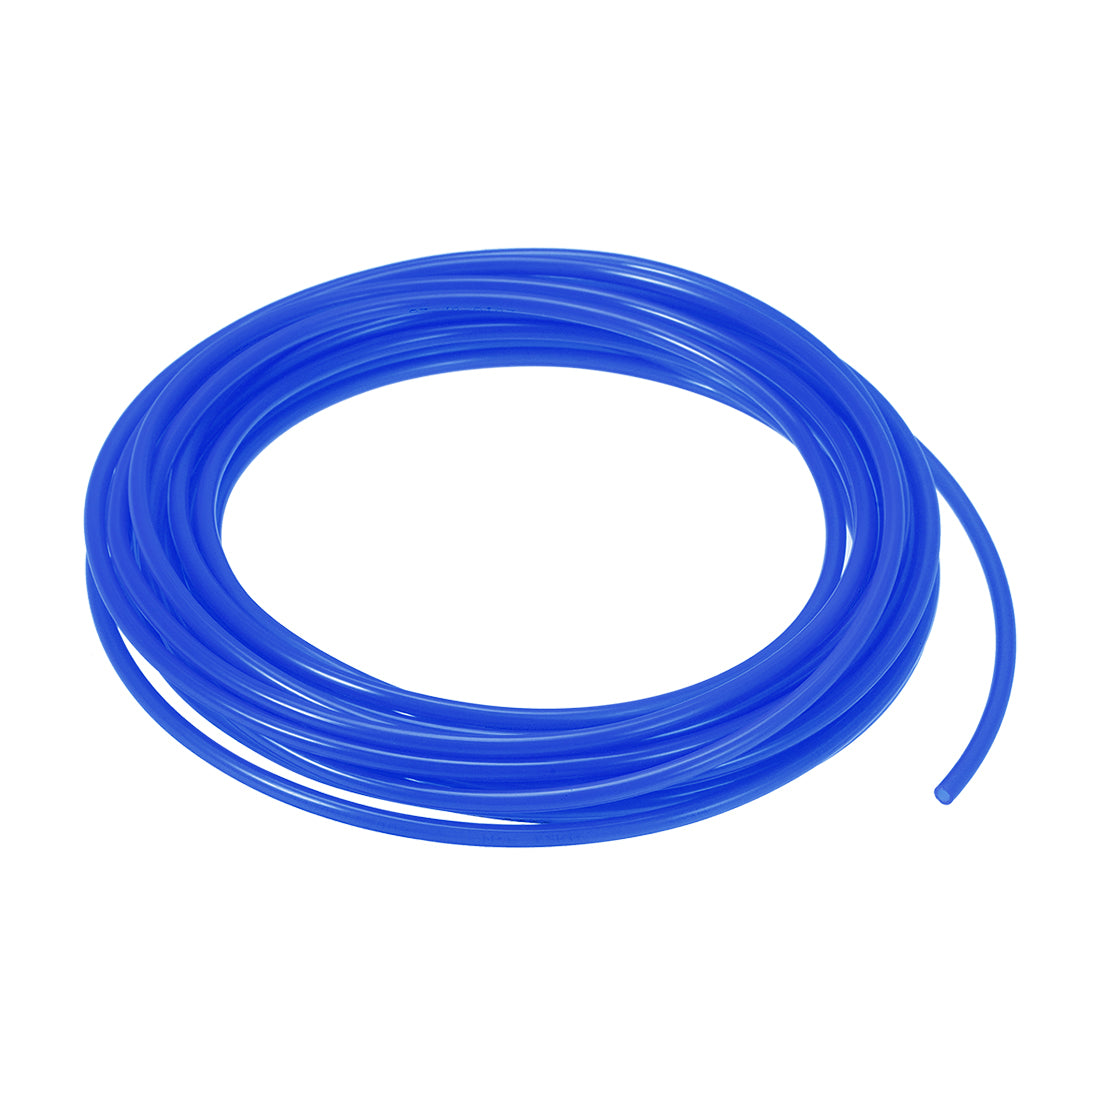 uxcell Uxcell 4mm OD 2.5mm ID 7m Long Blue PU Air Tubing Pipe Hose for Air Line Tube Fluid Transfer Pneumatic Tubing